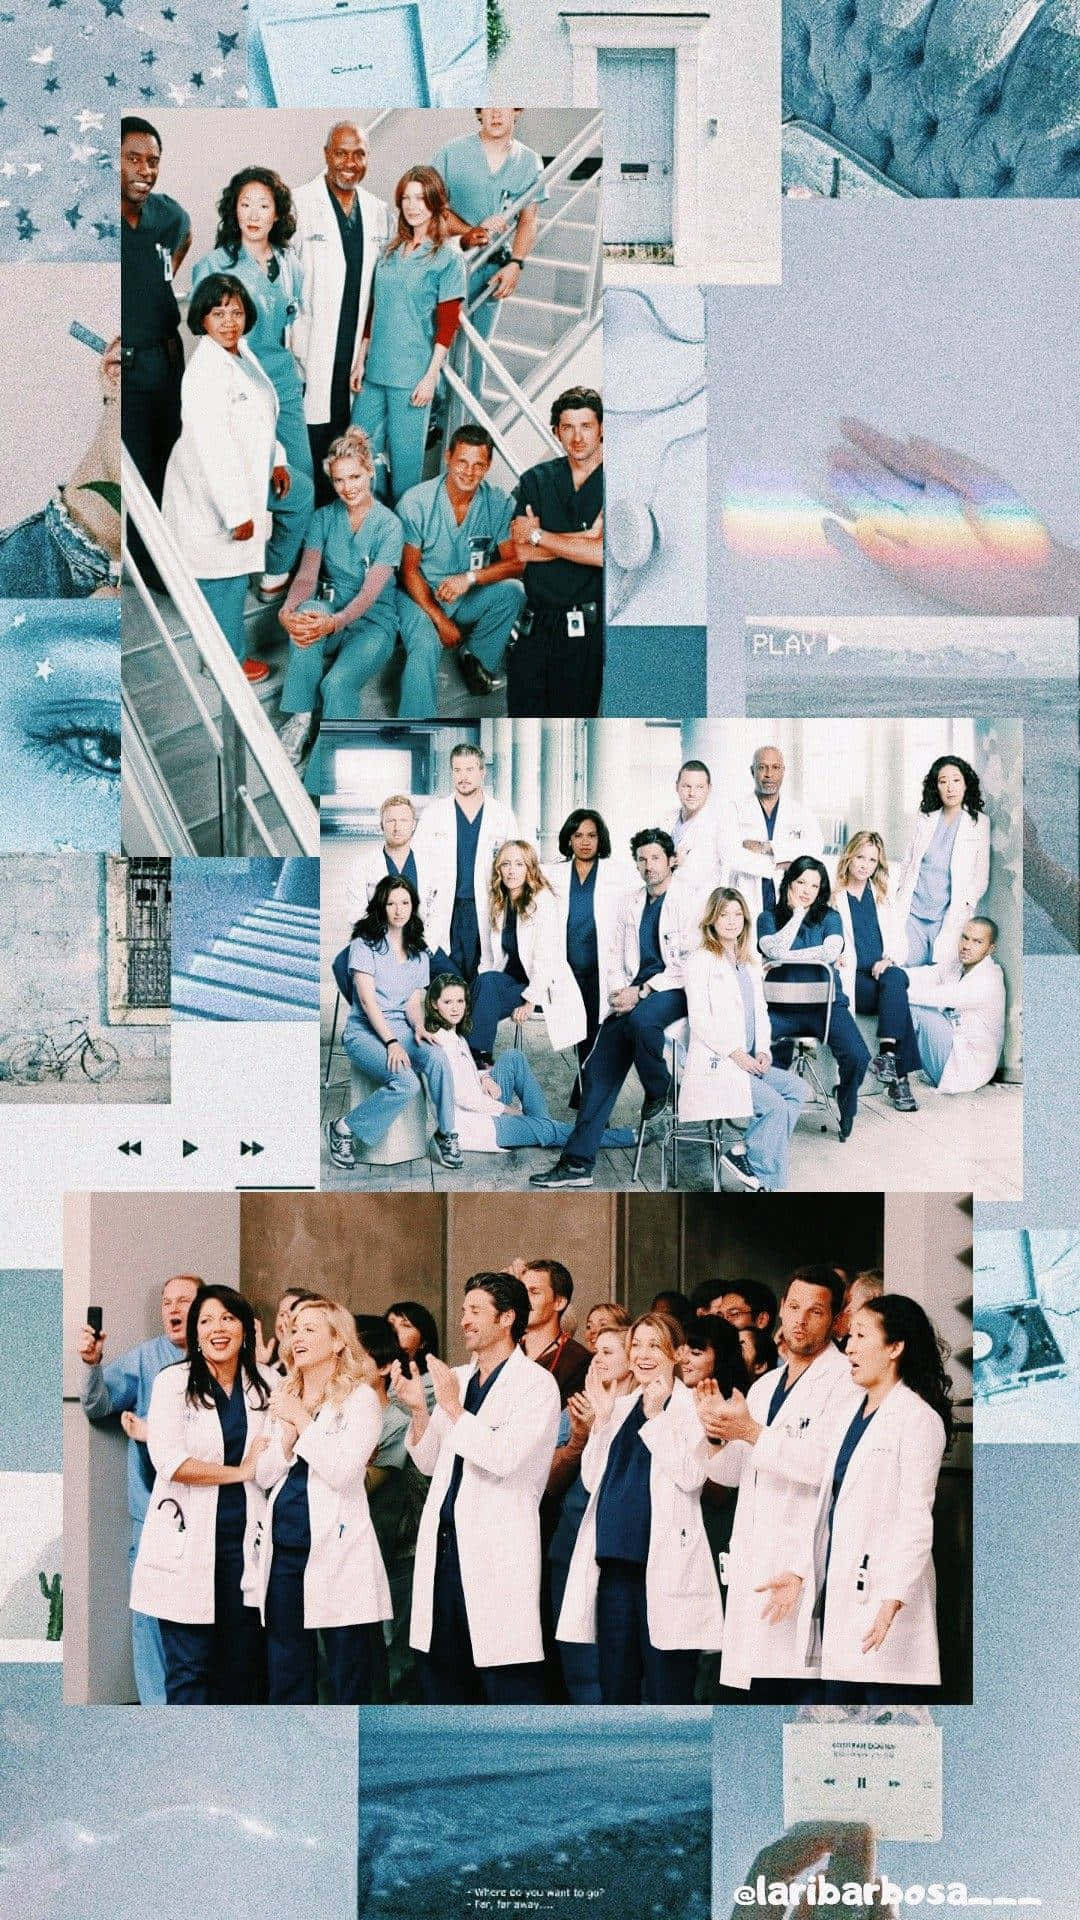 "Grey's Anatomy: The Journey We All Take Together"